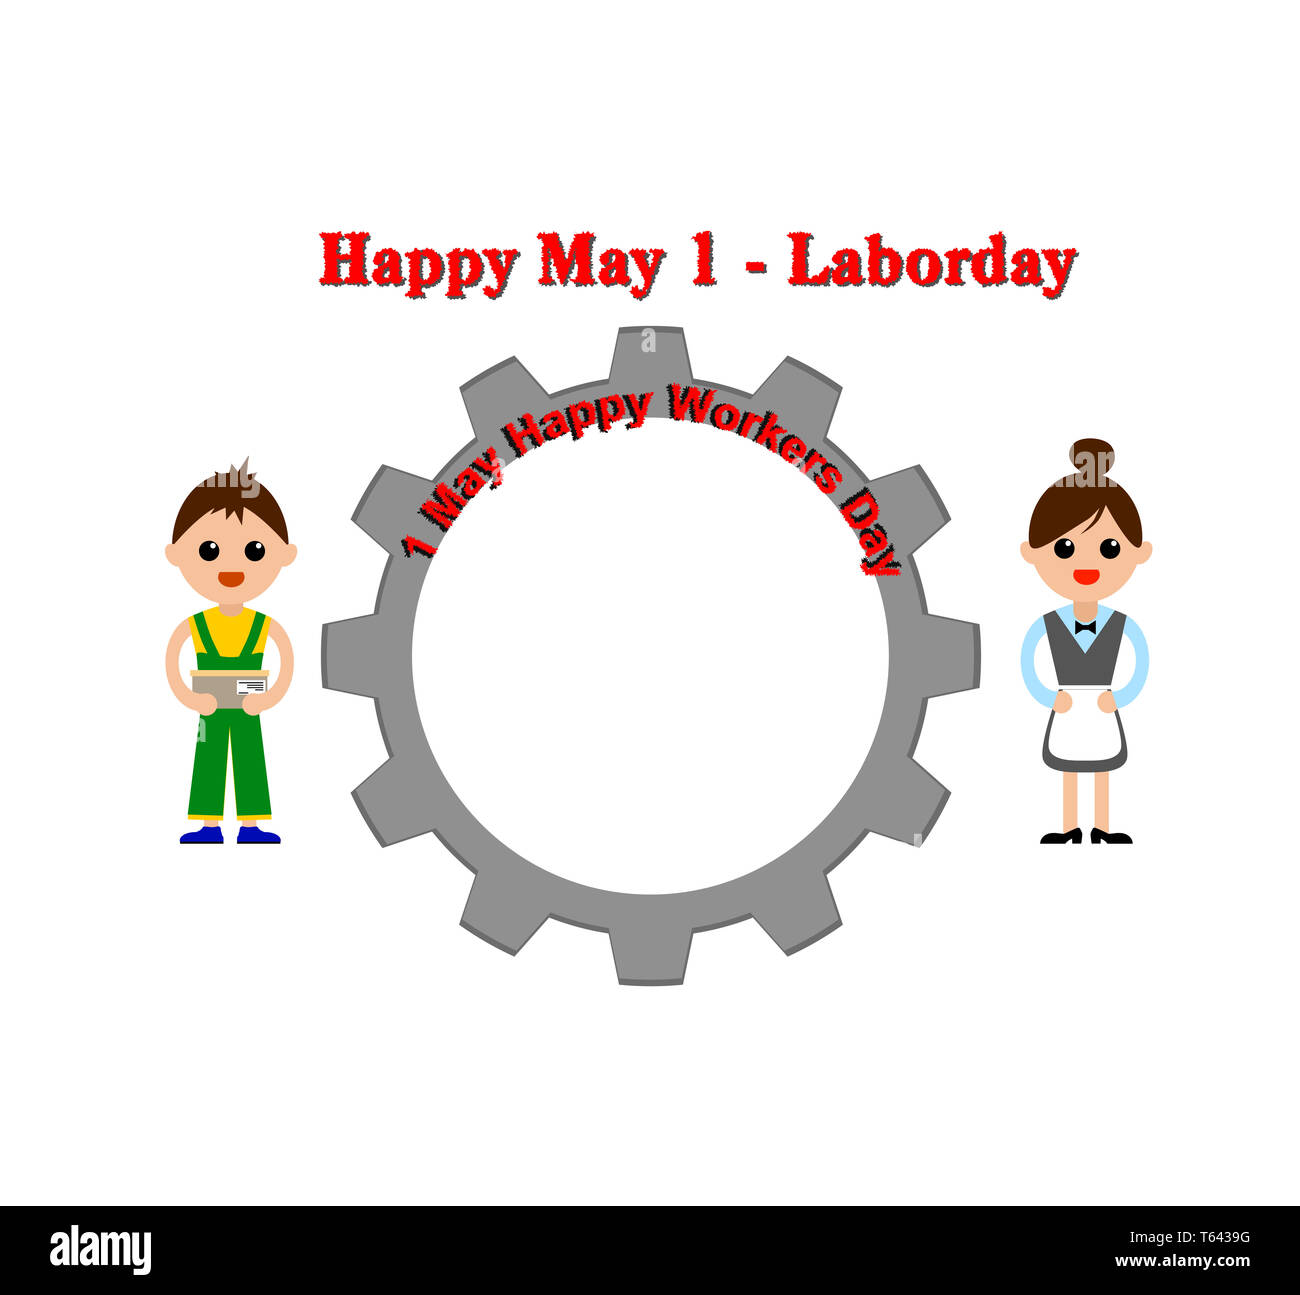 1 may happy workers day - 1 may happy laborday vector illustration Stock Photo